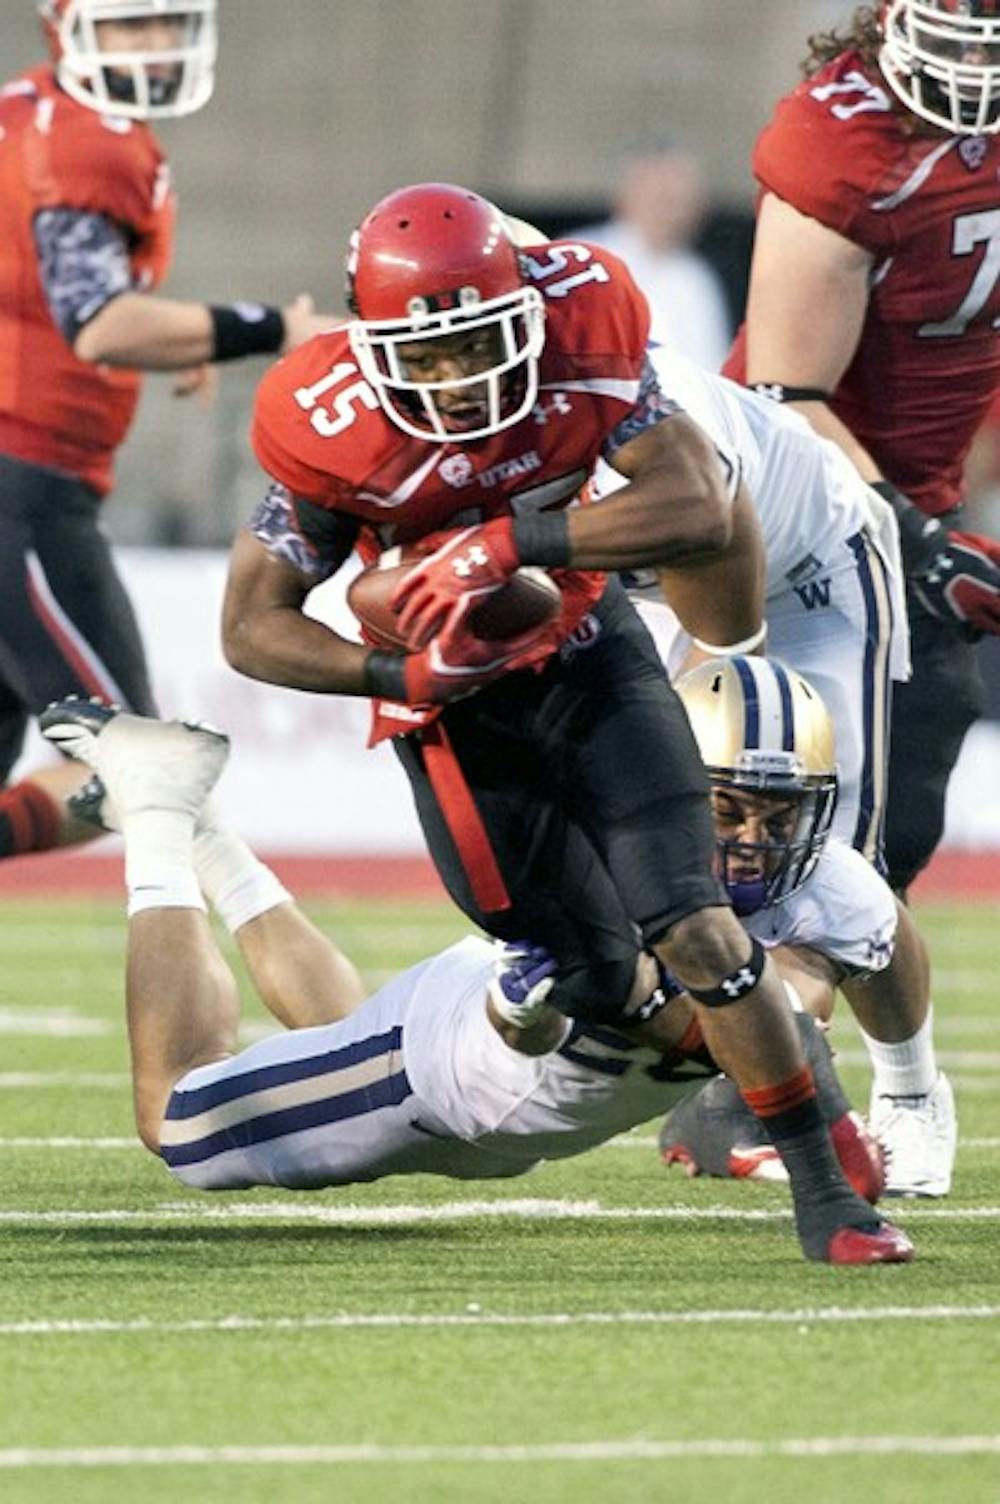 IN GOOD HANDS: Utah junior running back John White breaks free from a open-field tackle in the Utes’ 31-14 loss to Washington. White will likely see more carries against the Sun Devils on Saturday due to an injury to junior starting quarterback Jordan Wynn. (Photo courtesy The Daily Utah Chronicle)